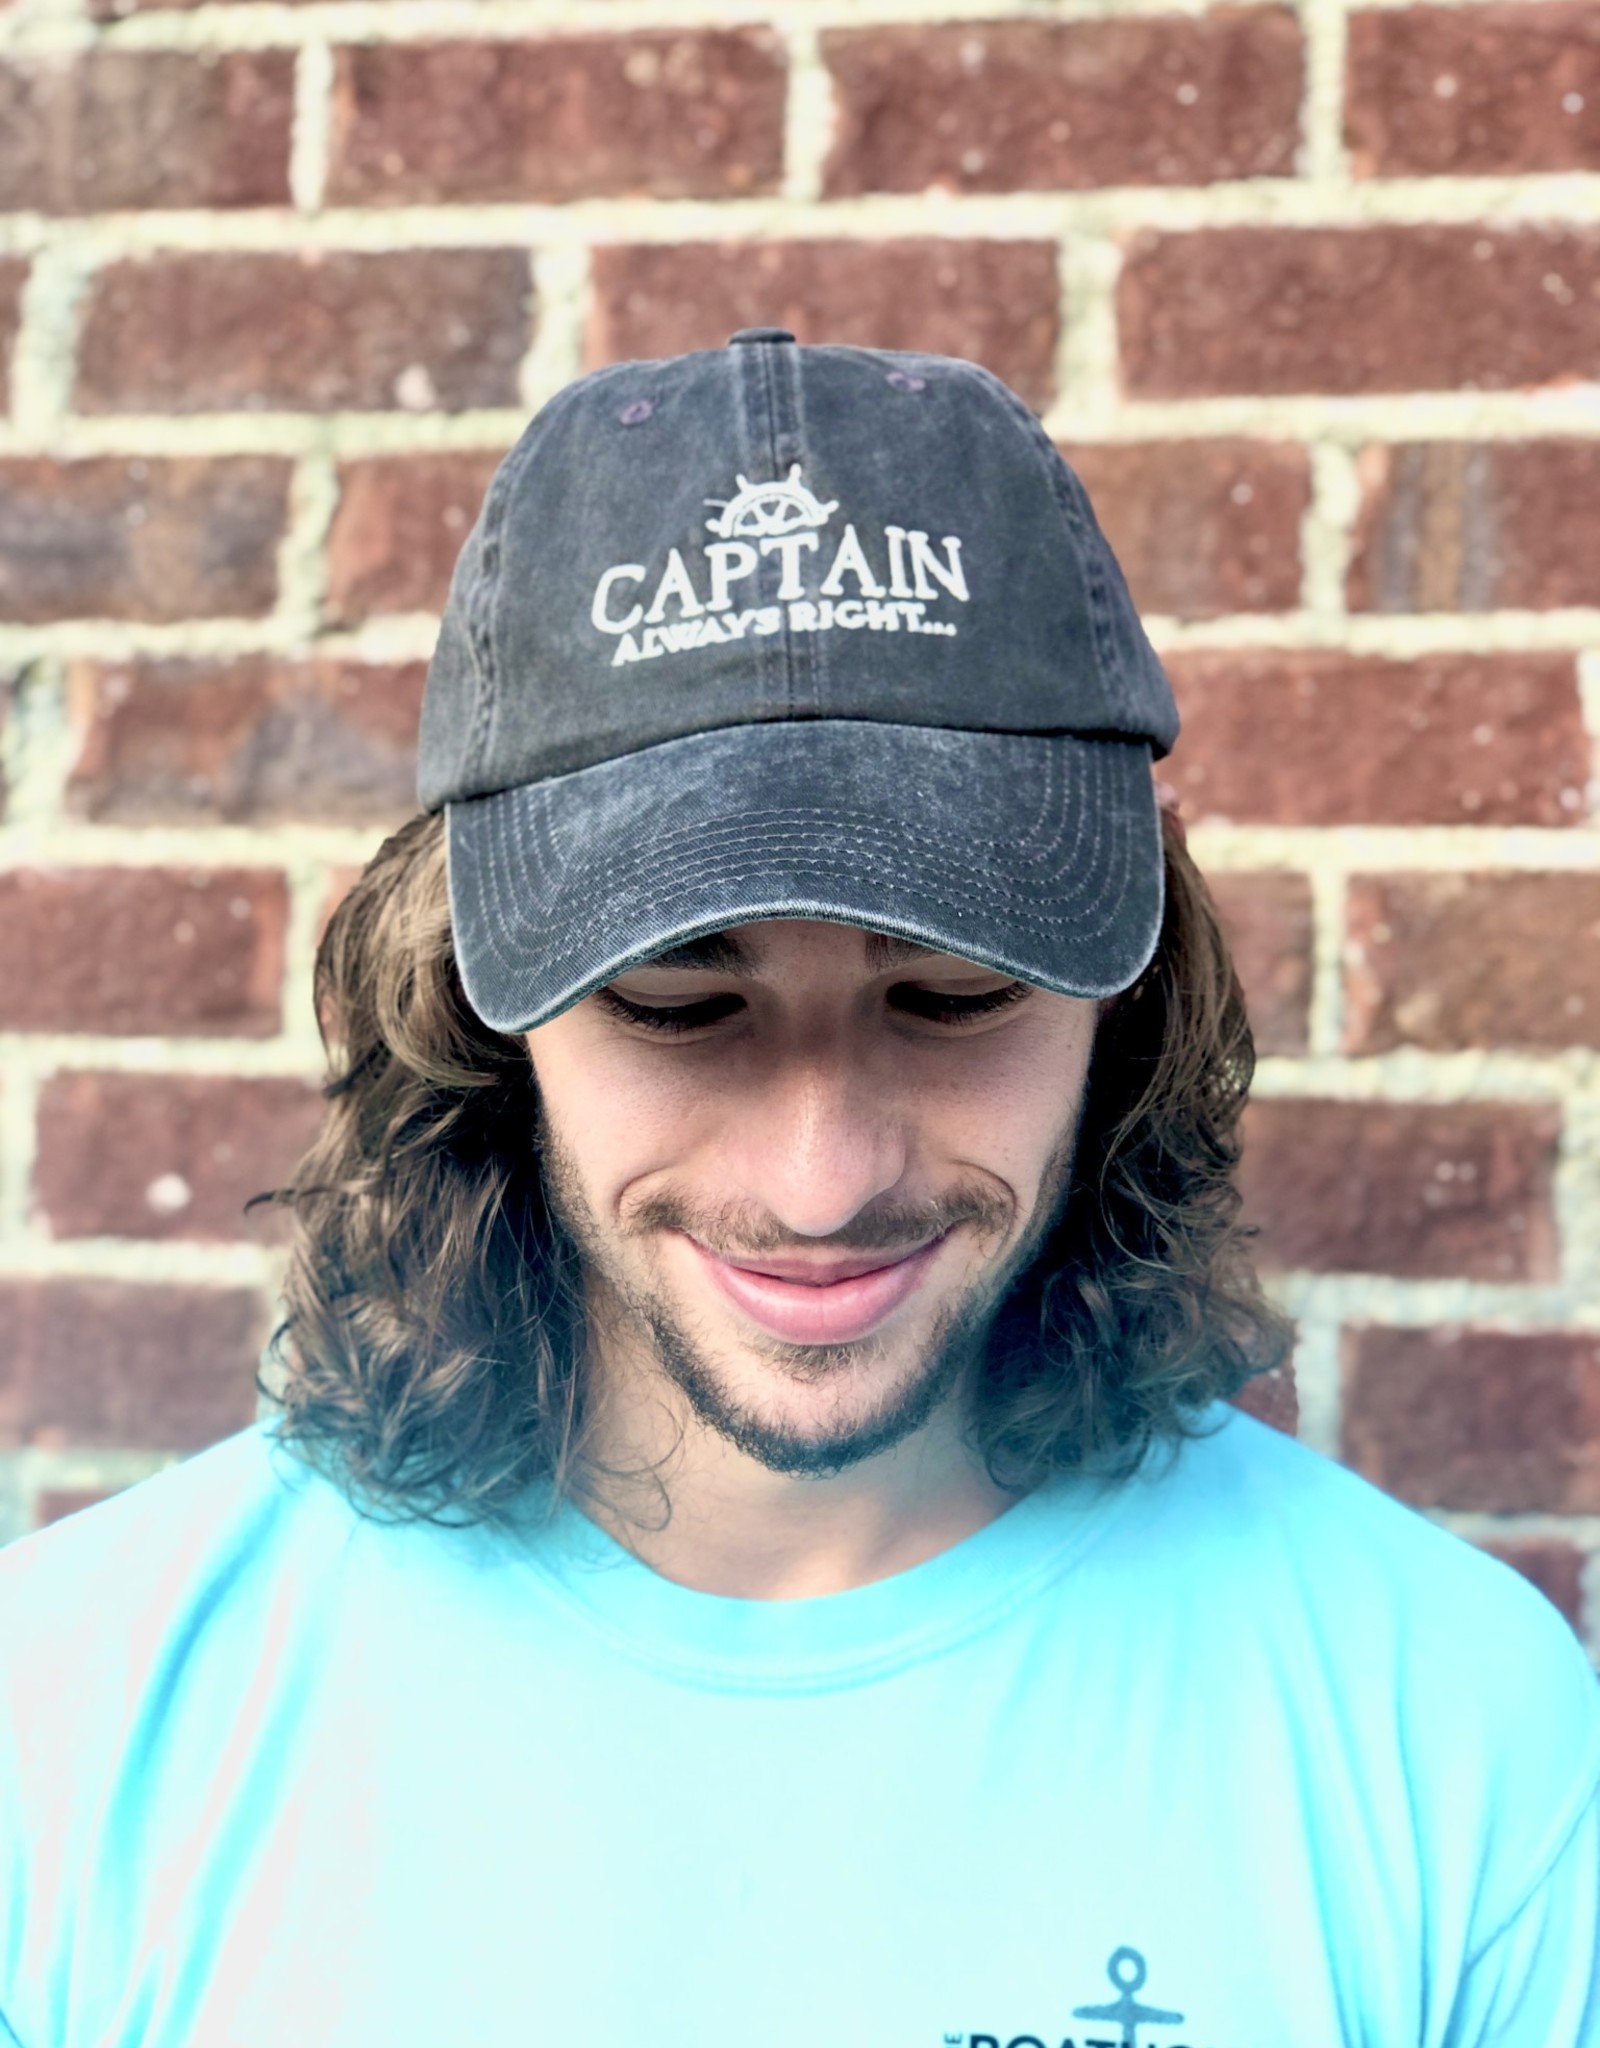 BOATHOUSE CAPTAIN ALWAYS RIGHT HAT